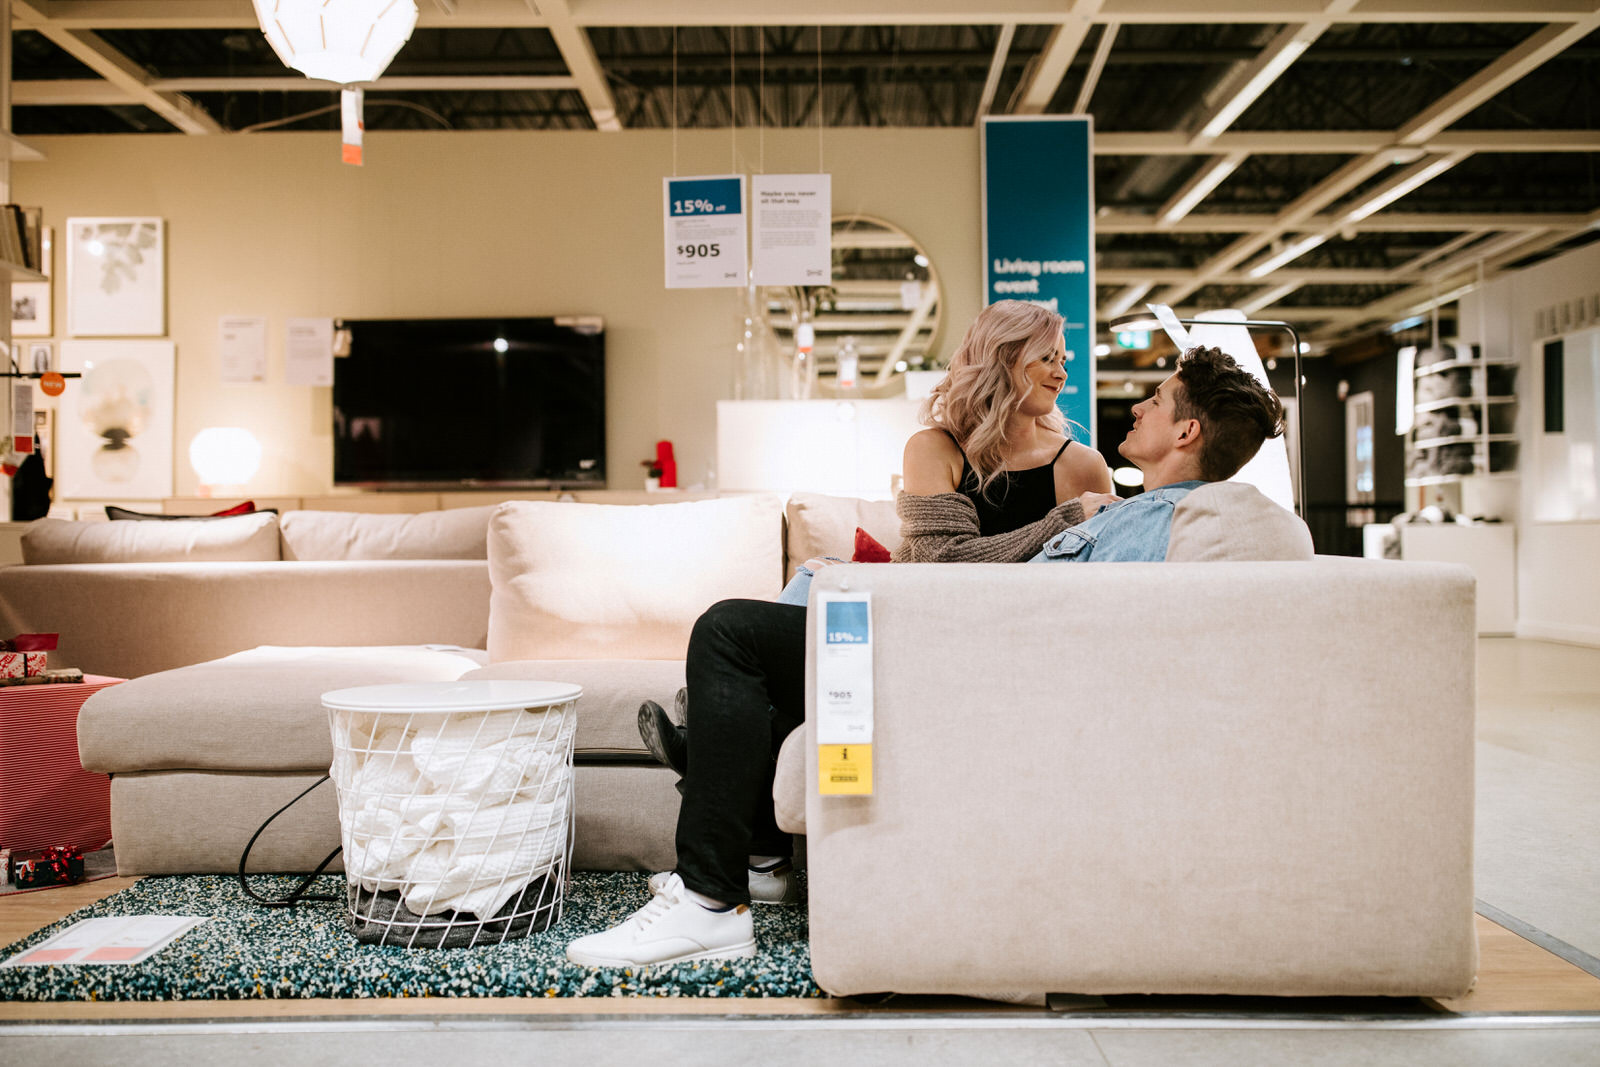 Hipster Couples Session Inside IKEA, Edmonton engagement session inside IKEA. Edmonton Engagement Photographer with fun cute couples